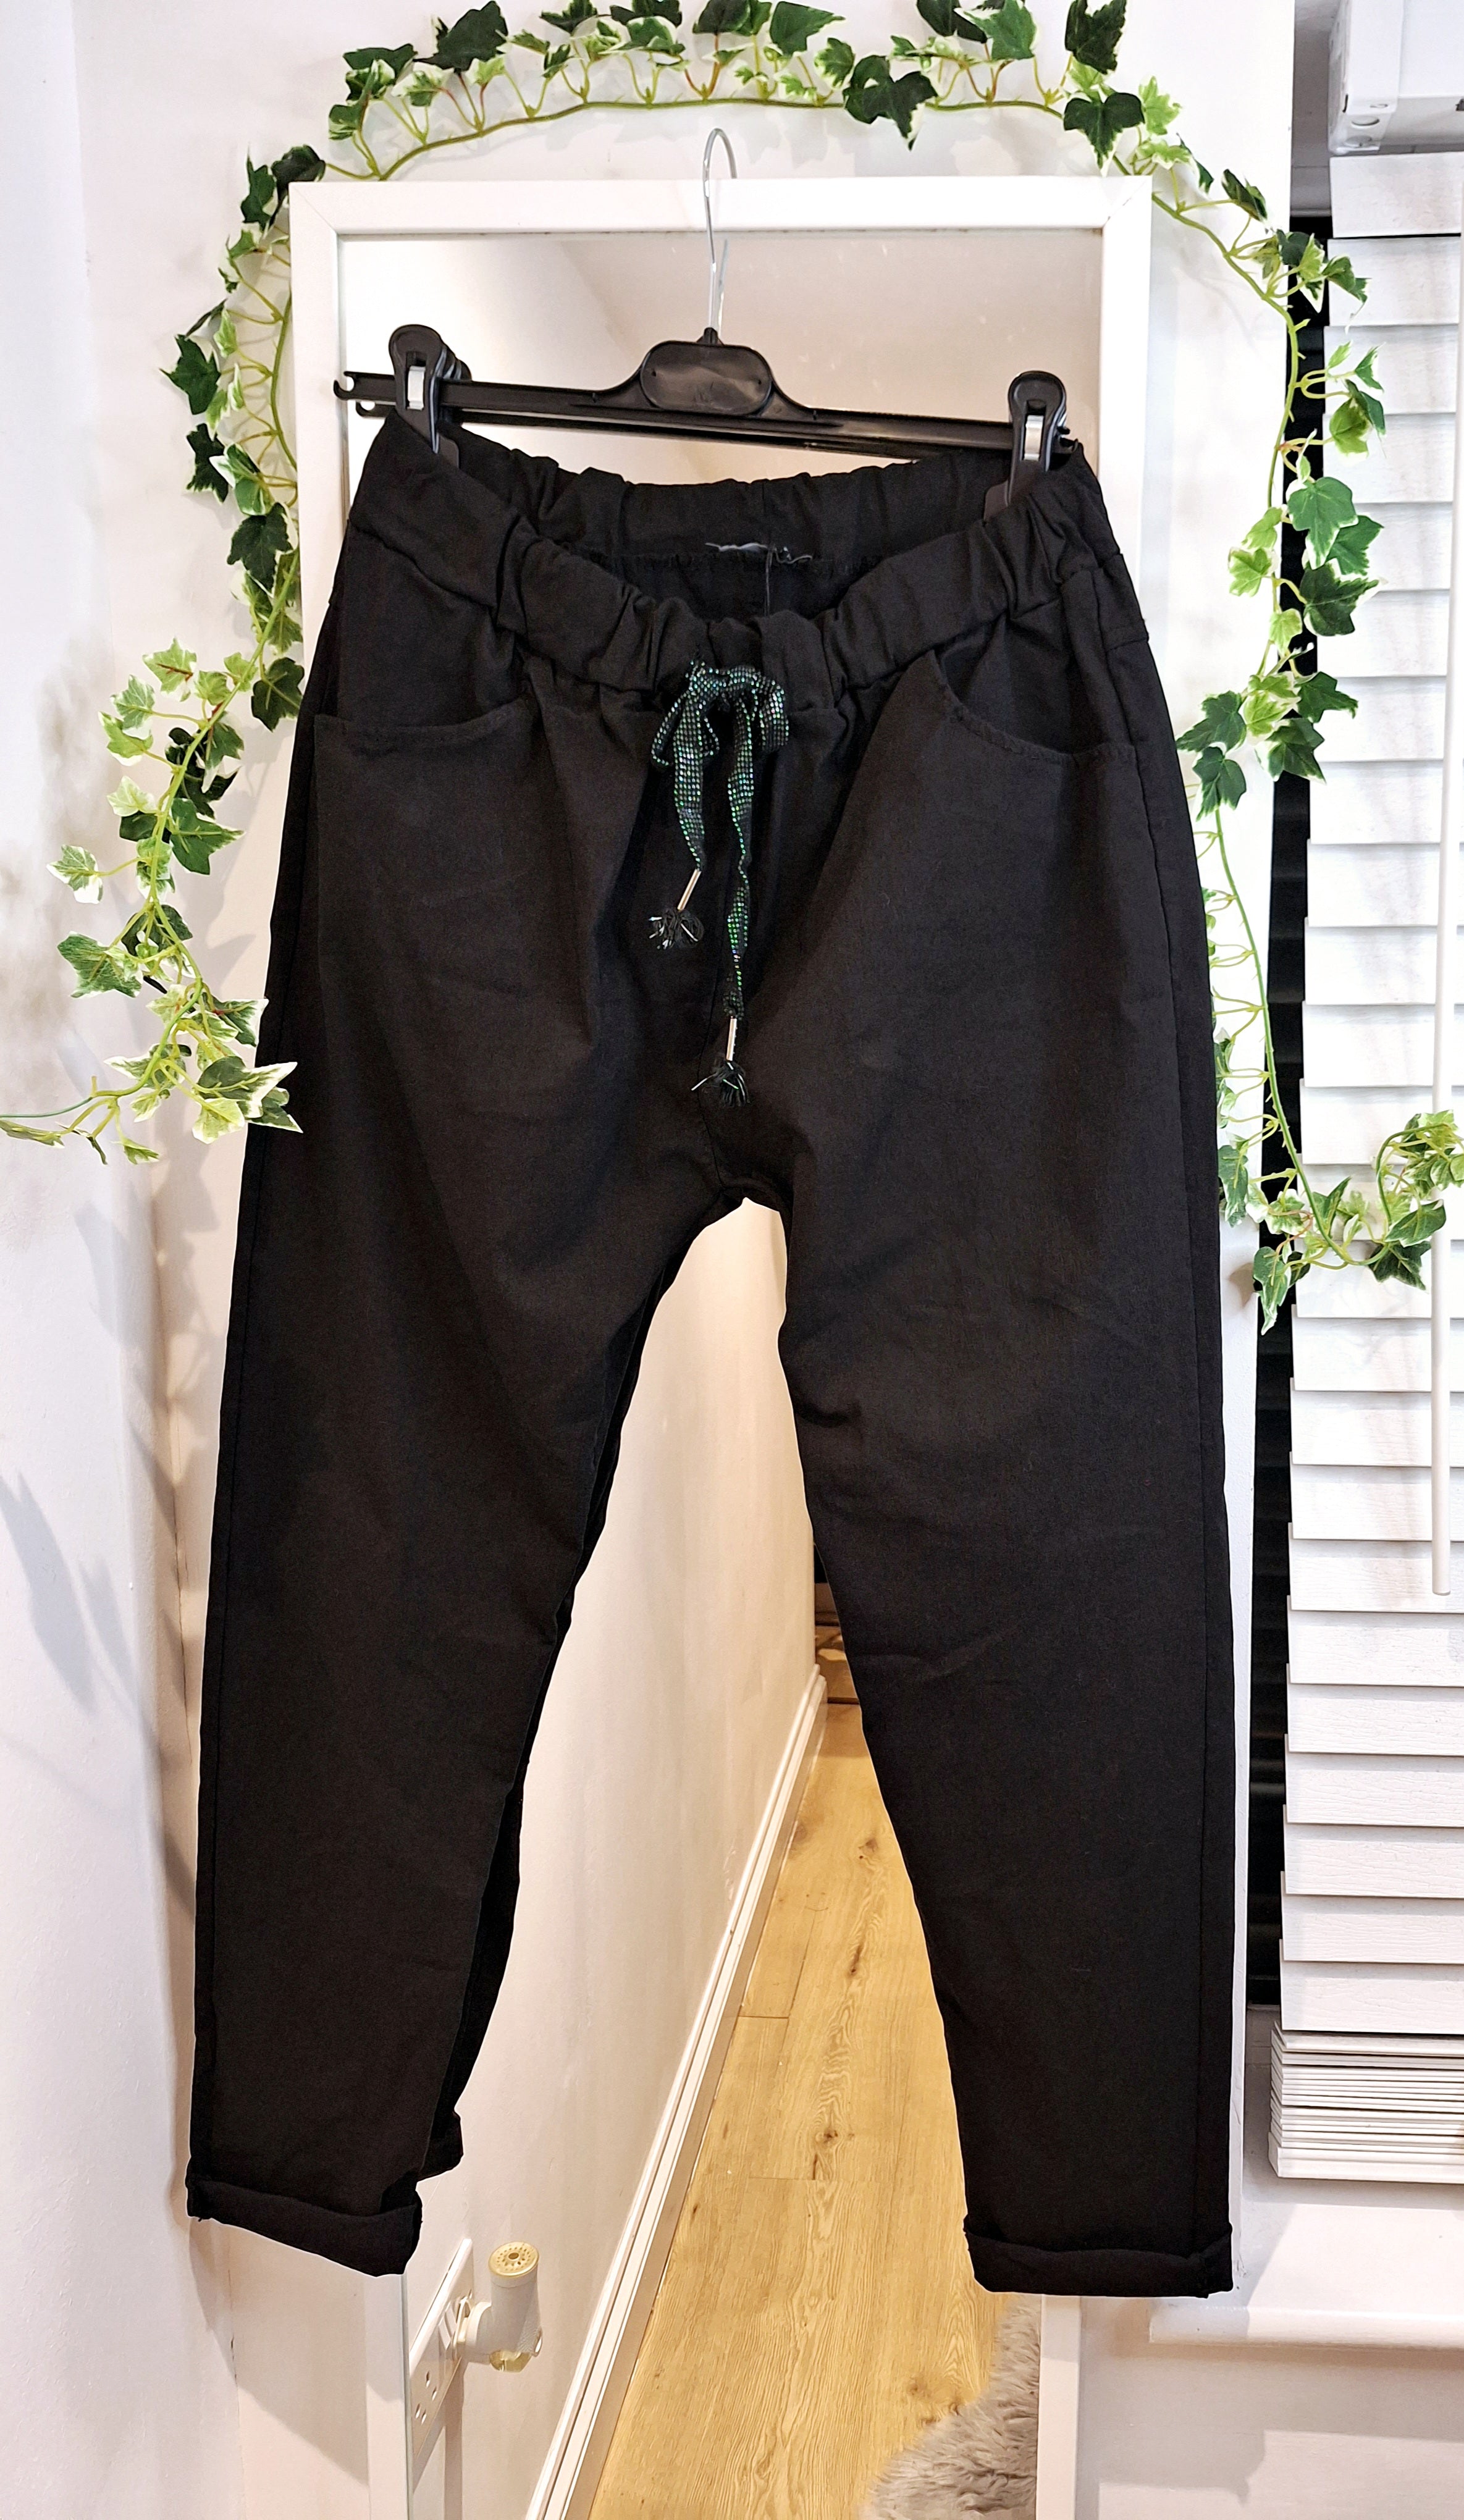 New Regular and Larger Black Magic Trousers